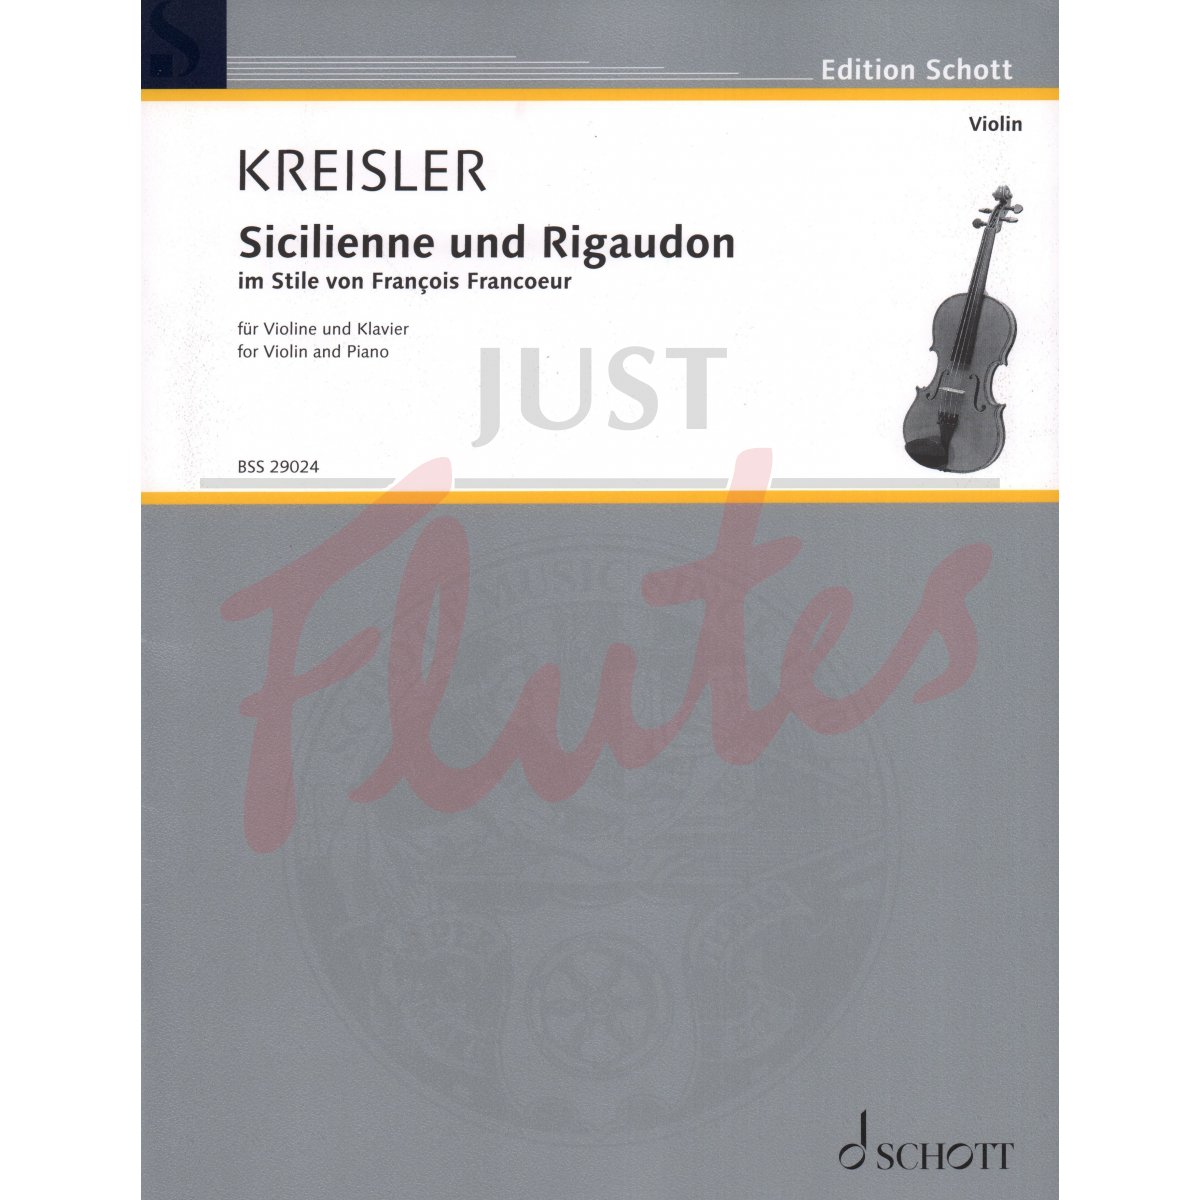 Sicilienne and Rigaudon for Violin and Piano